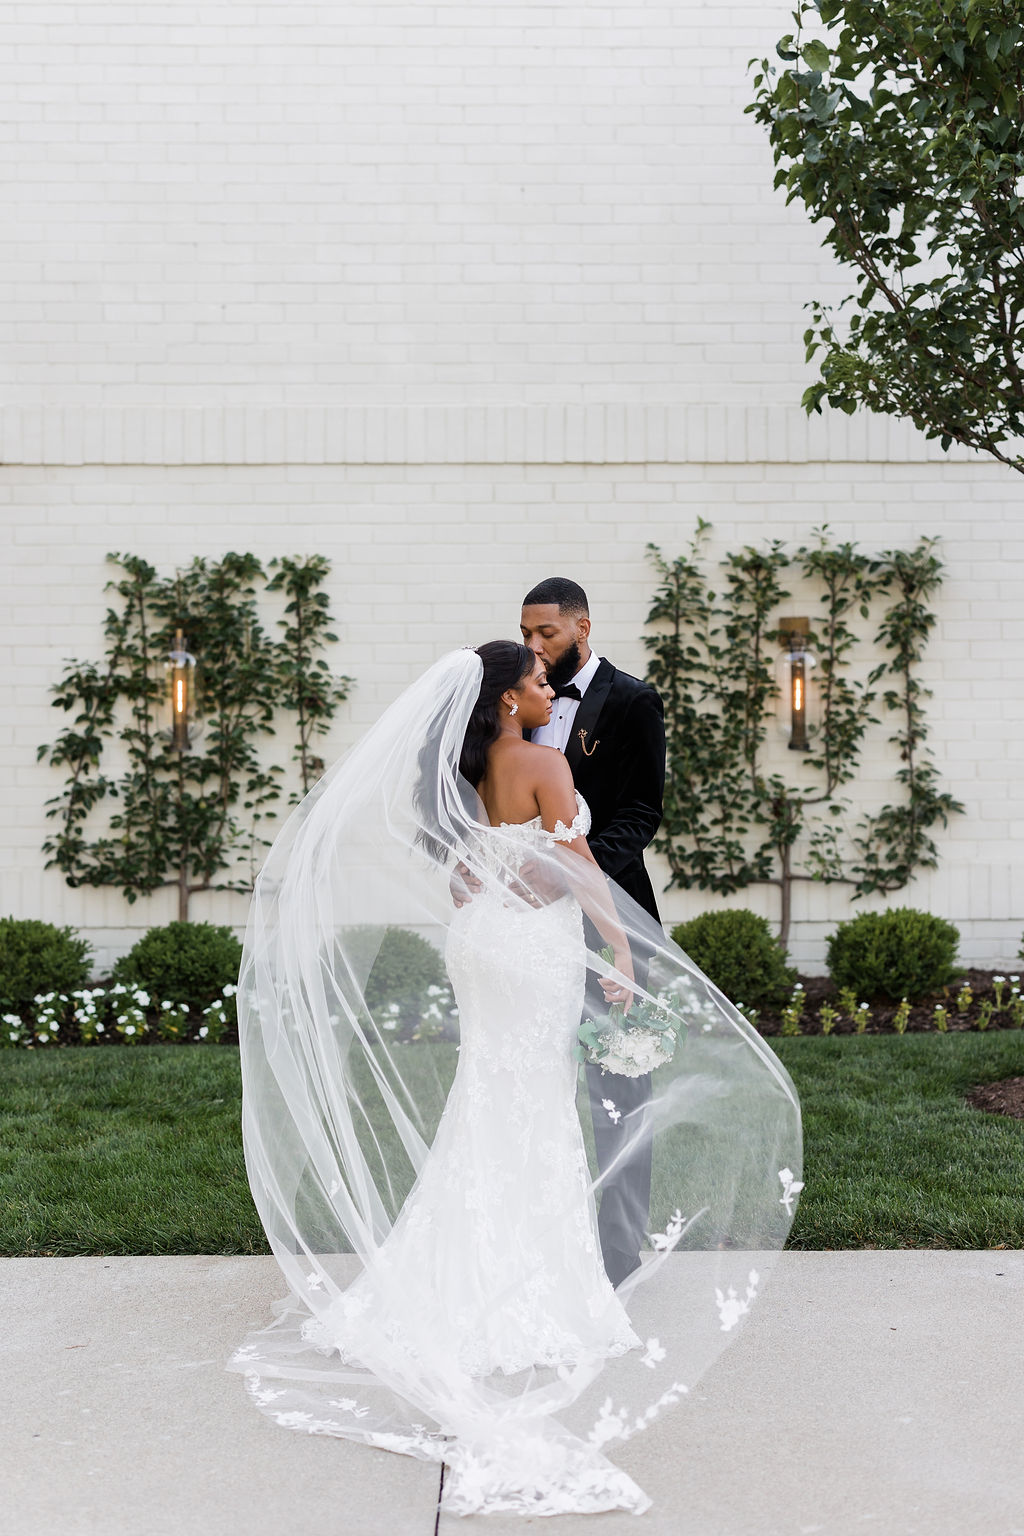 ritz charles courtyard wedding just married couple